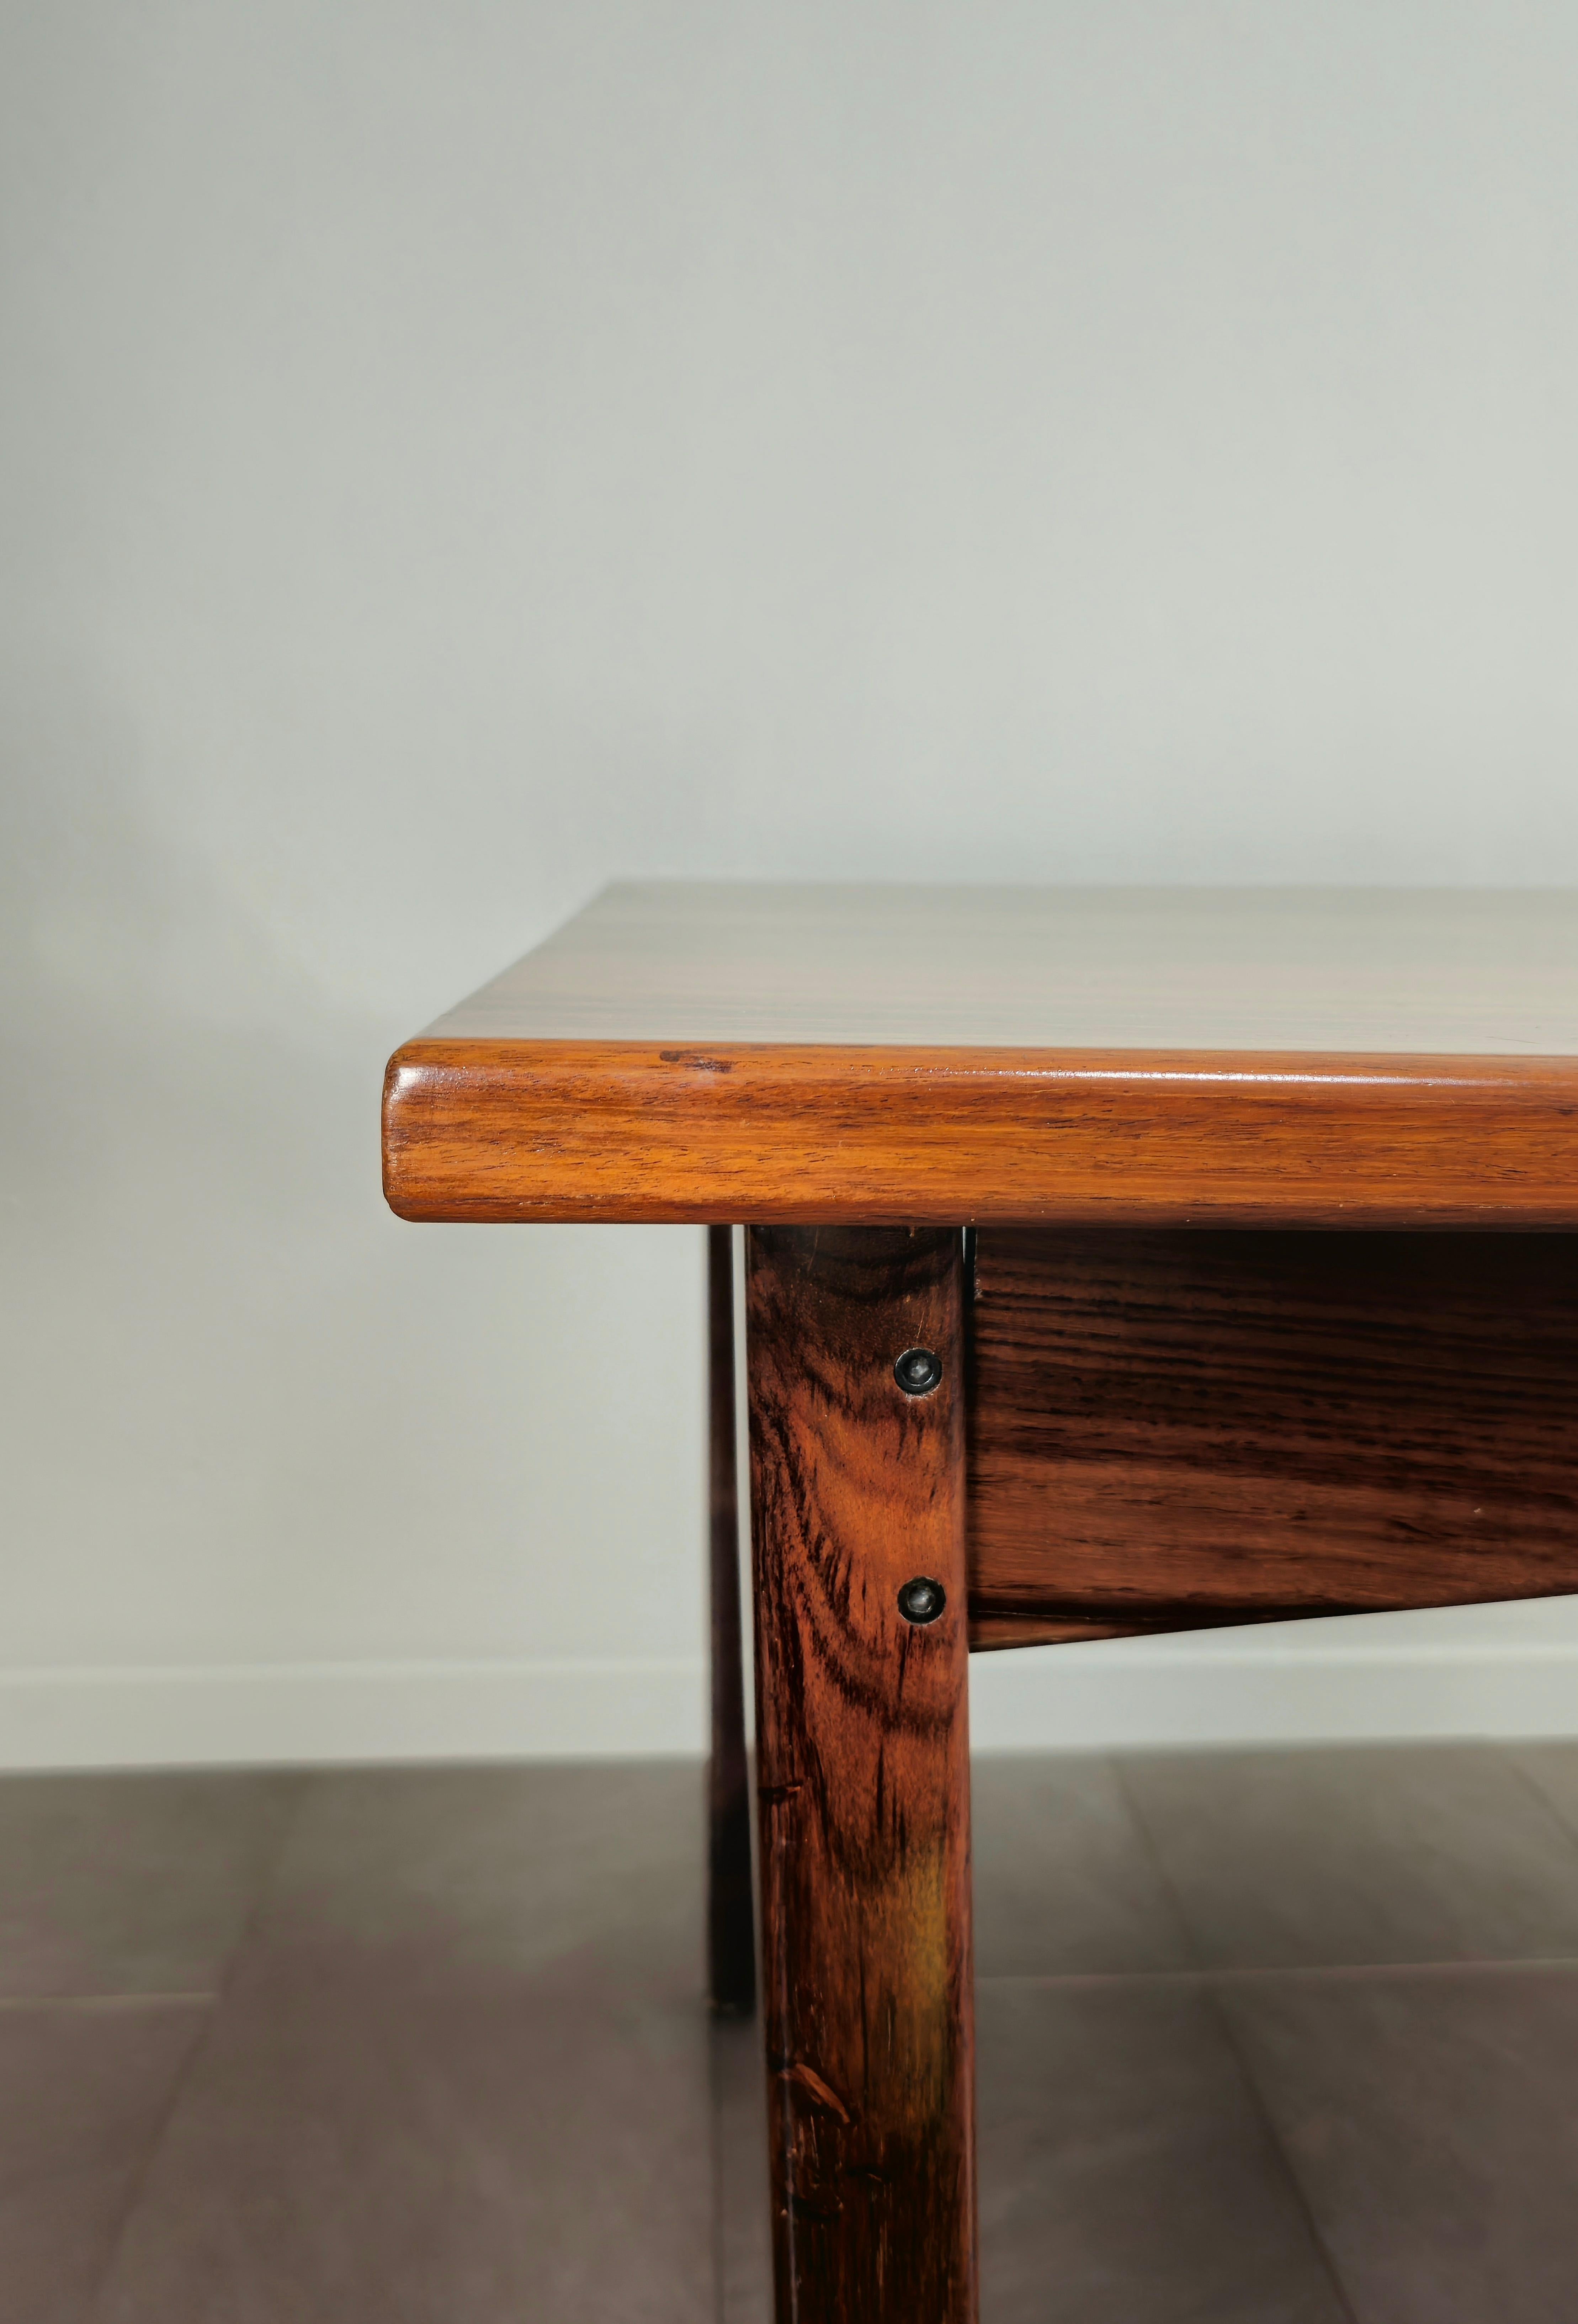 Wood Dining Room Table Extendable Large Rectangular Midcentury, Denmark, 1960s For Sale 4